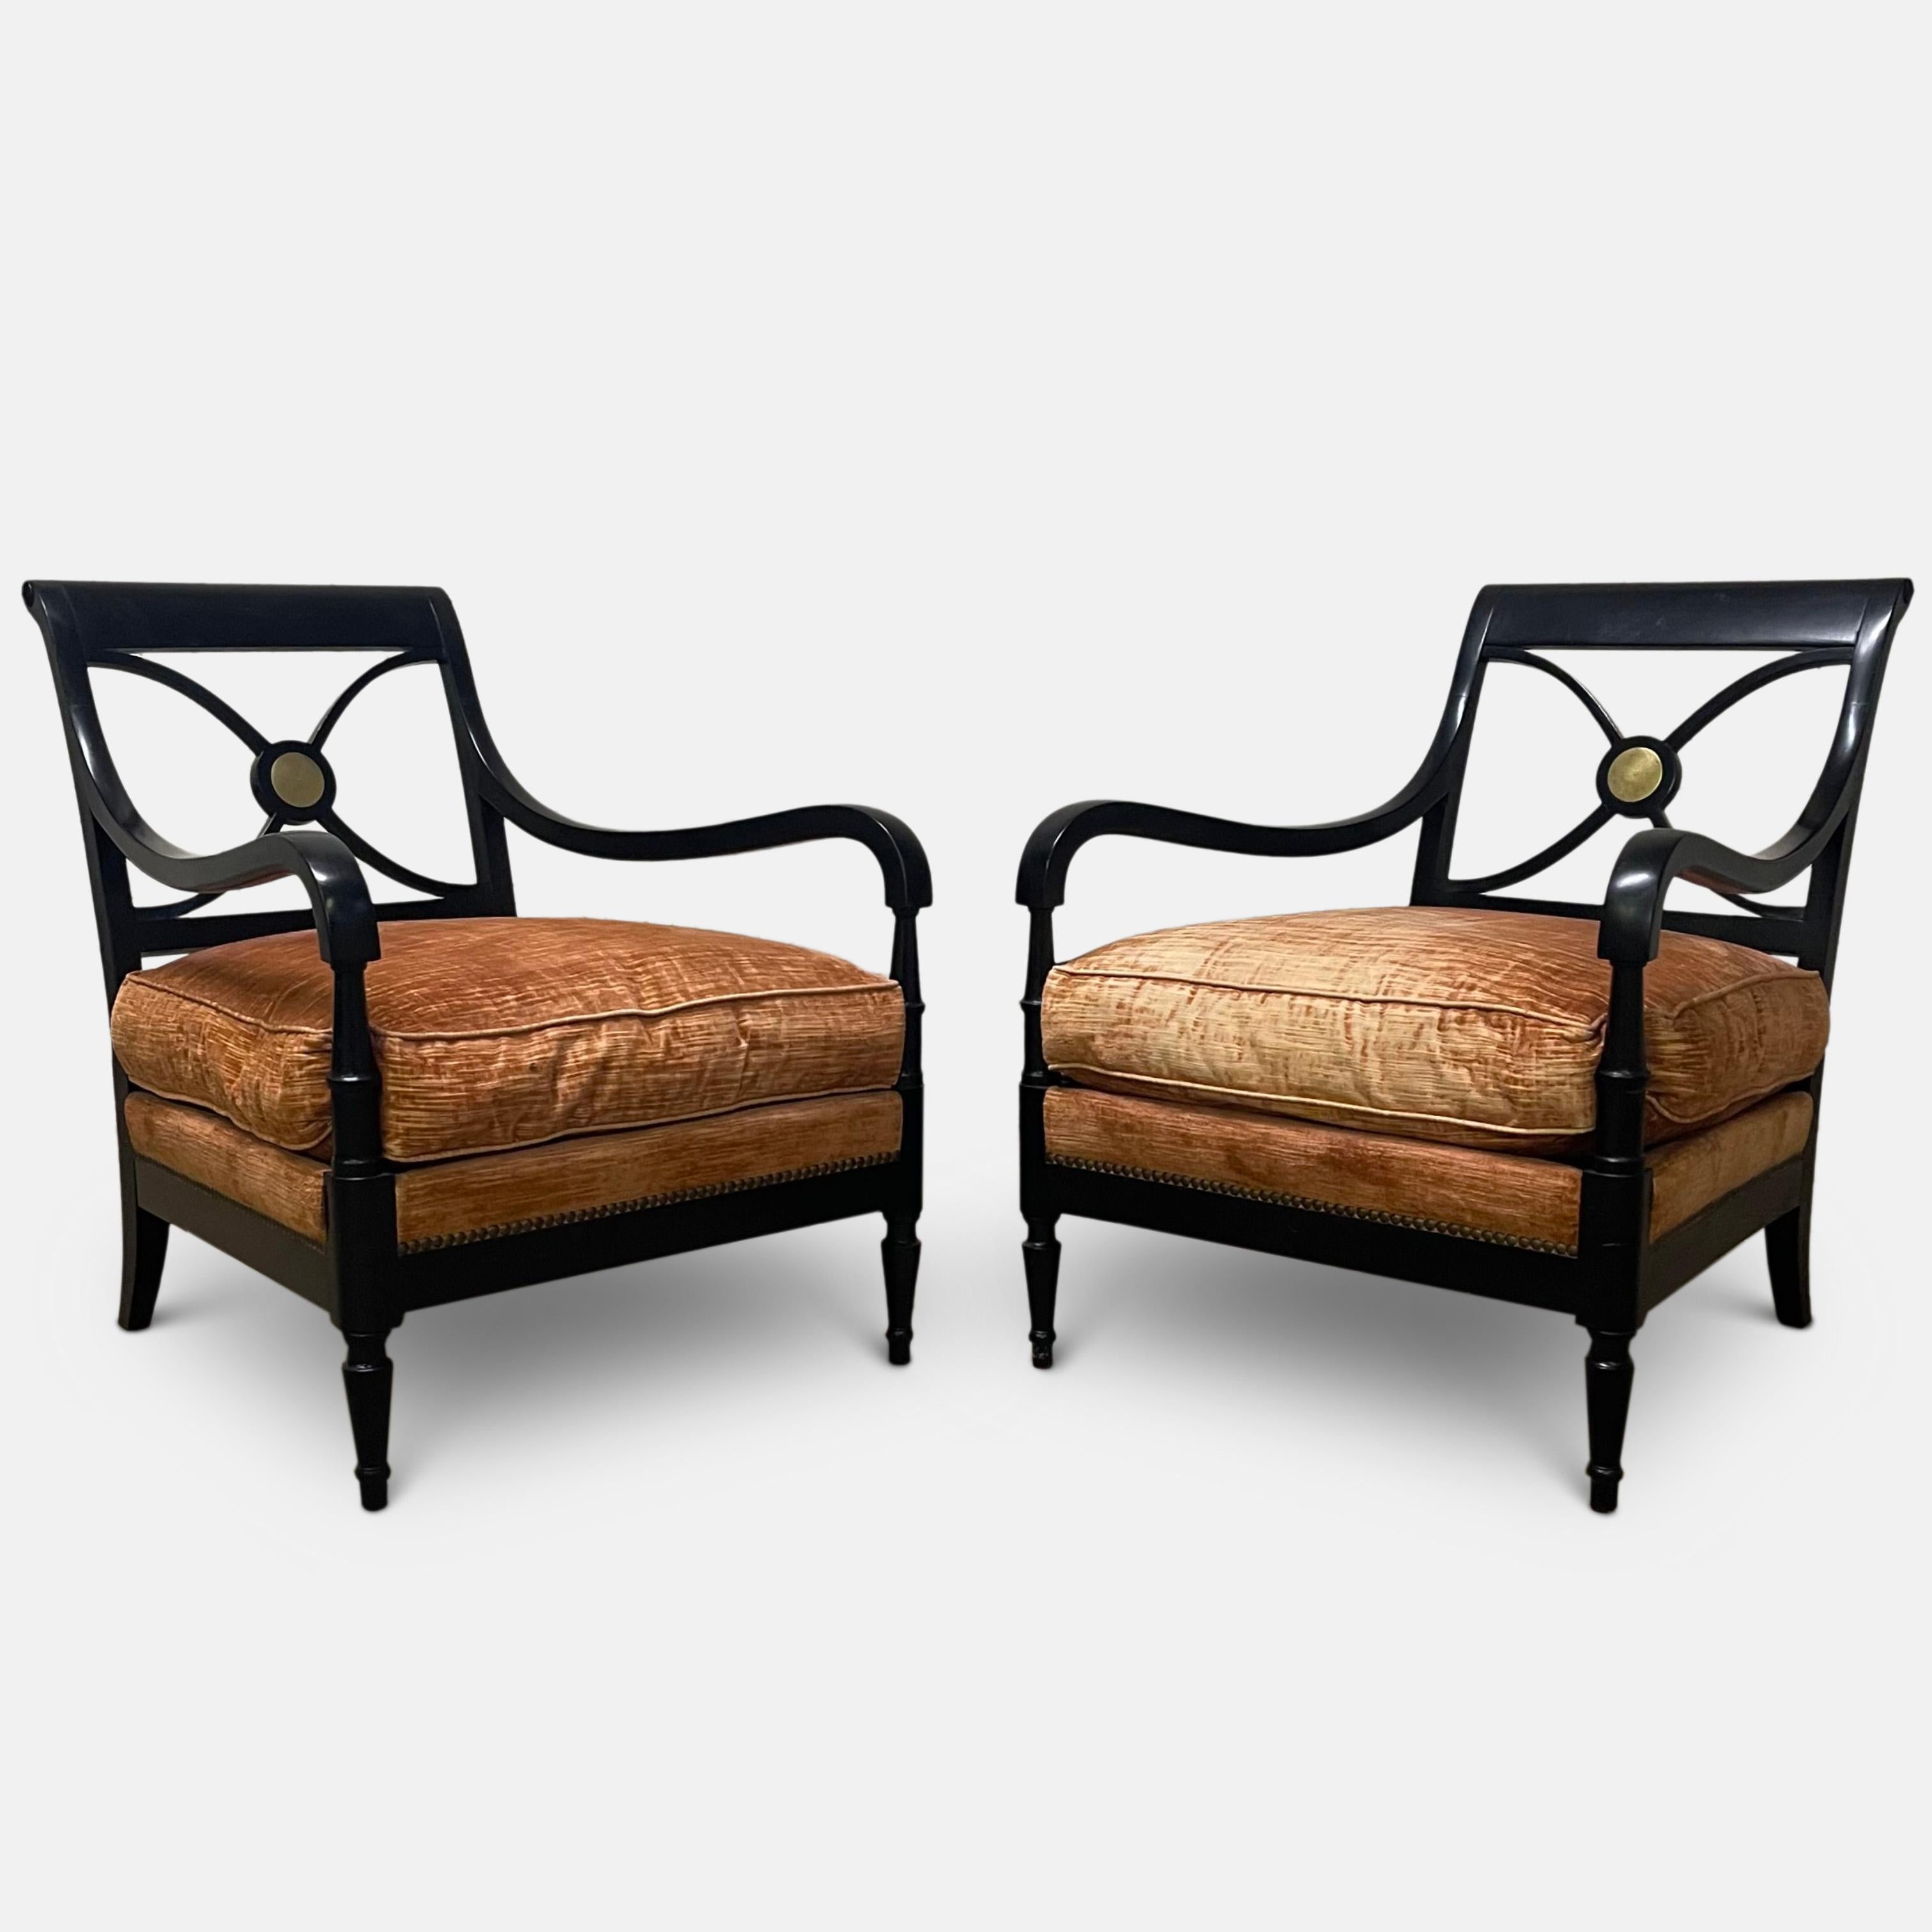 Pair of 1940's Ebonised Lounge Chairs by Maison Jansen For Sale 1